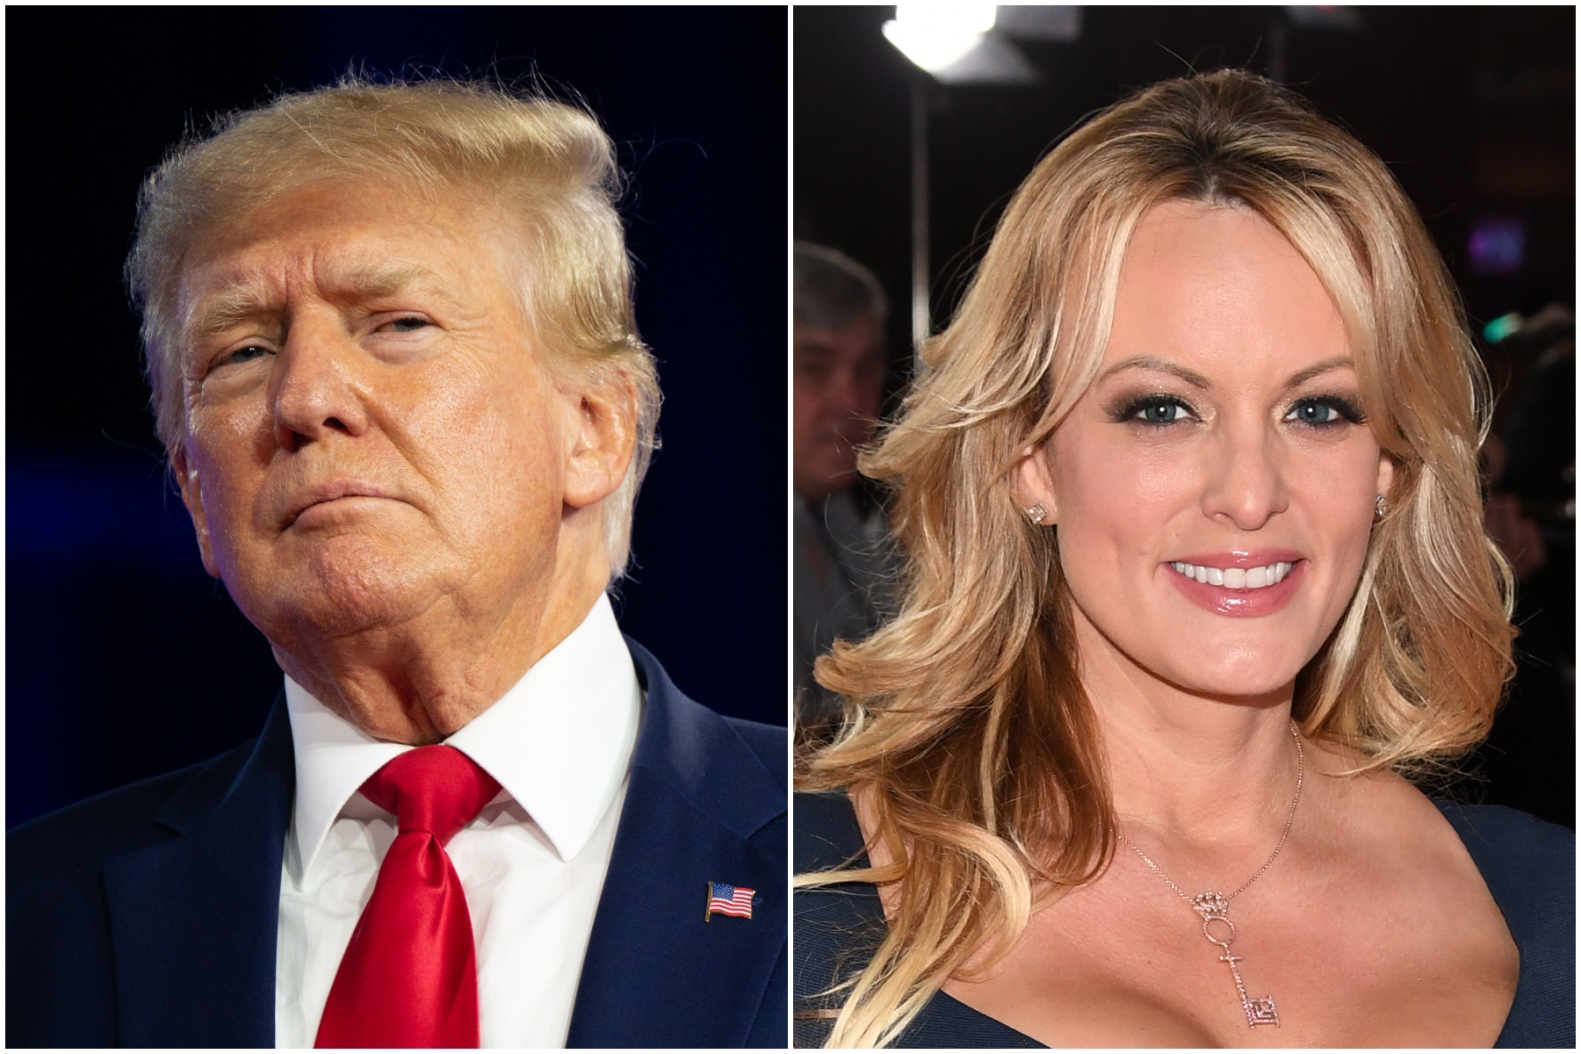 Trump awarded $121,000 in legal fees from porn star Stormy Daniels